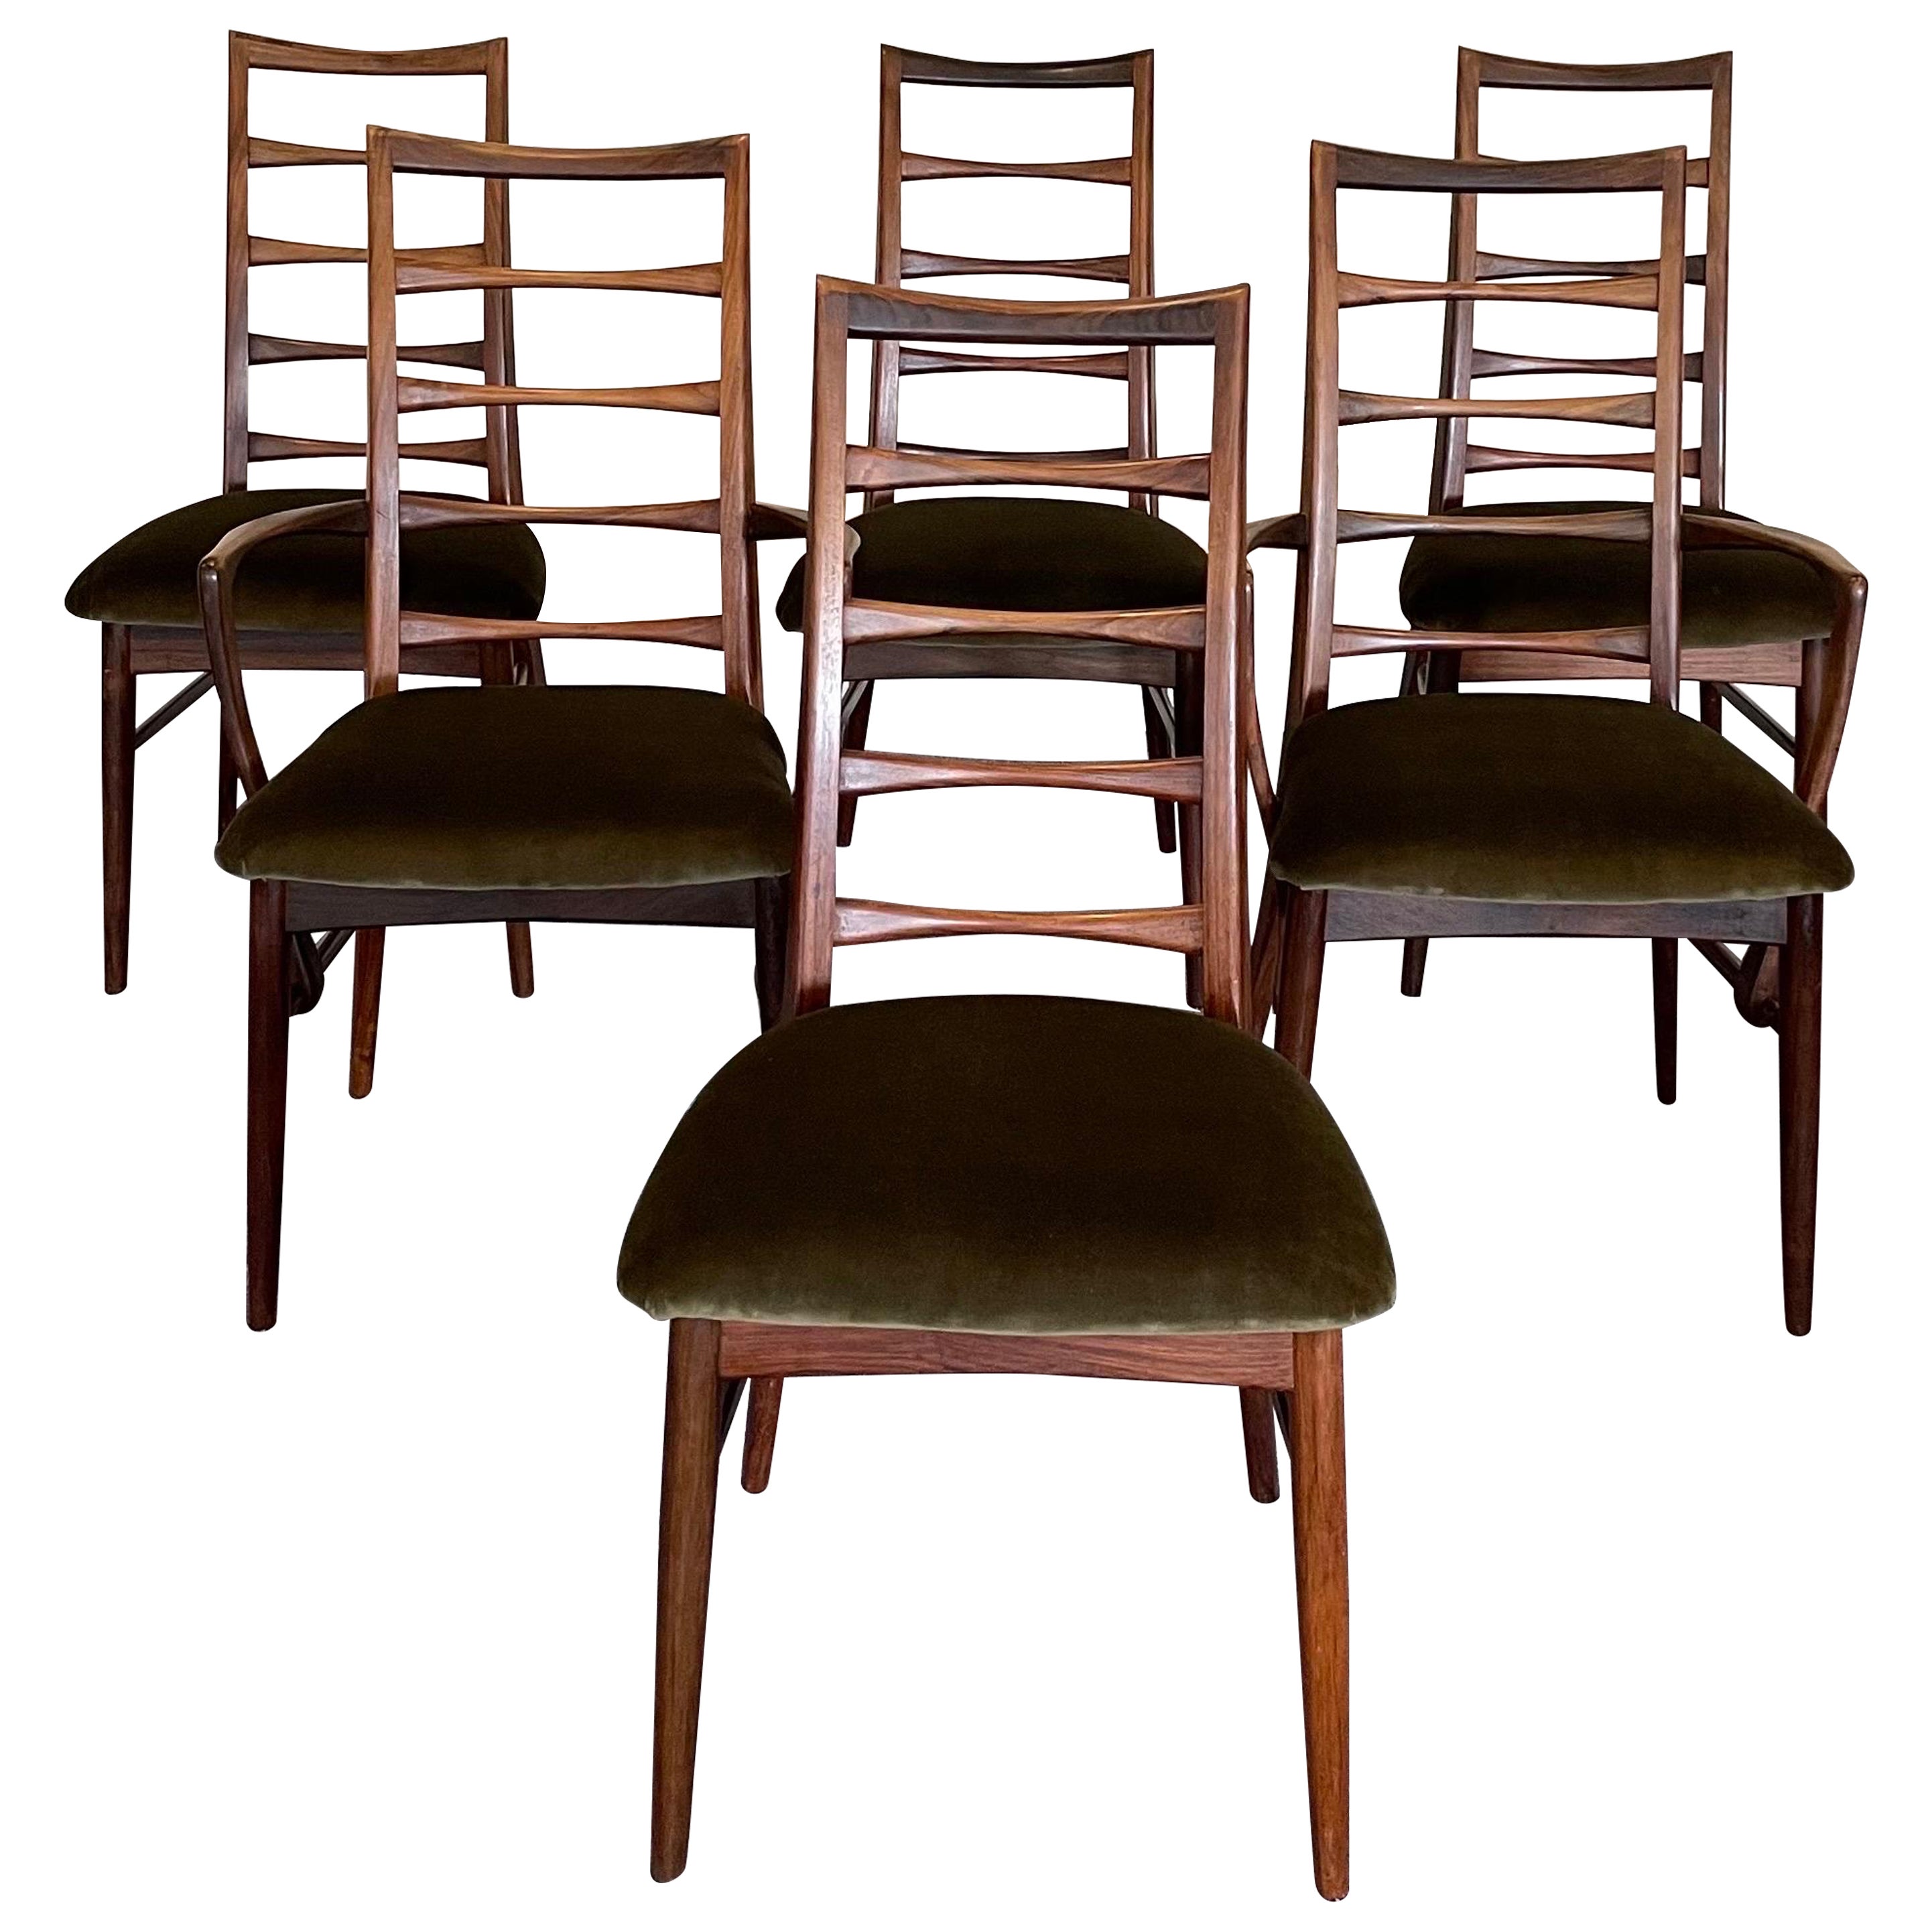 1960s Niels Koefoed "Lis" Brazilian Rosewood & Mohair Dining Chairs- Set of 6 For Sale